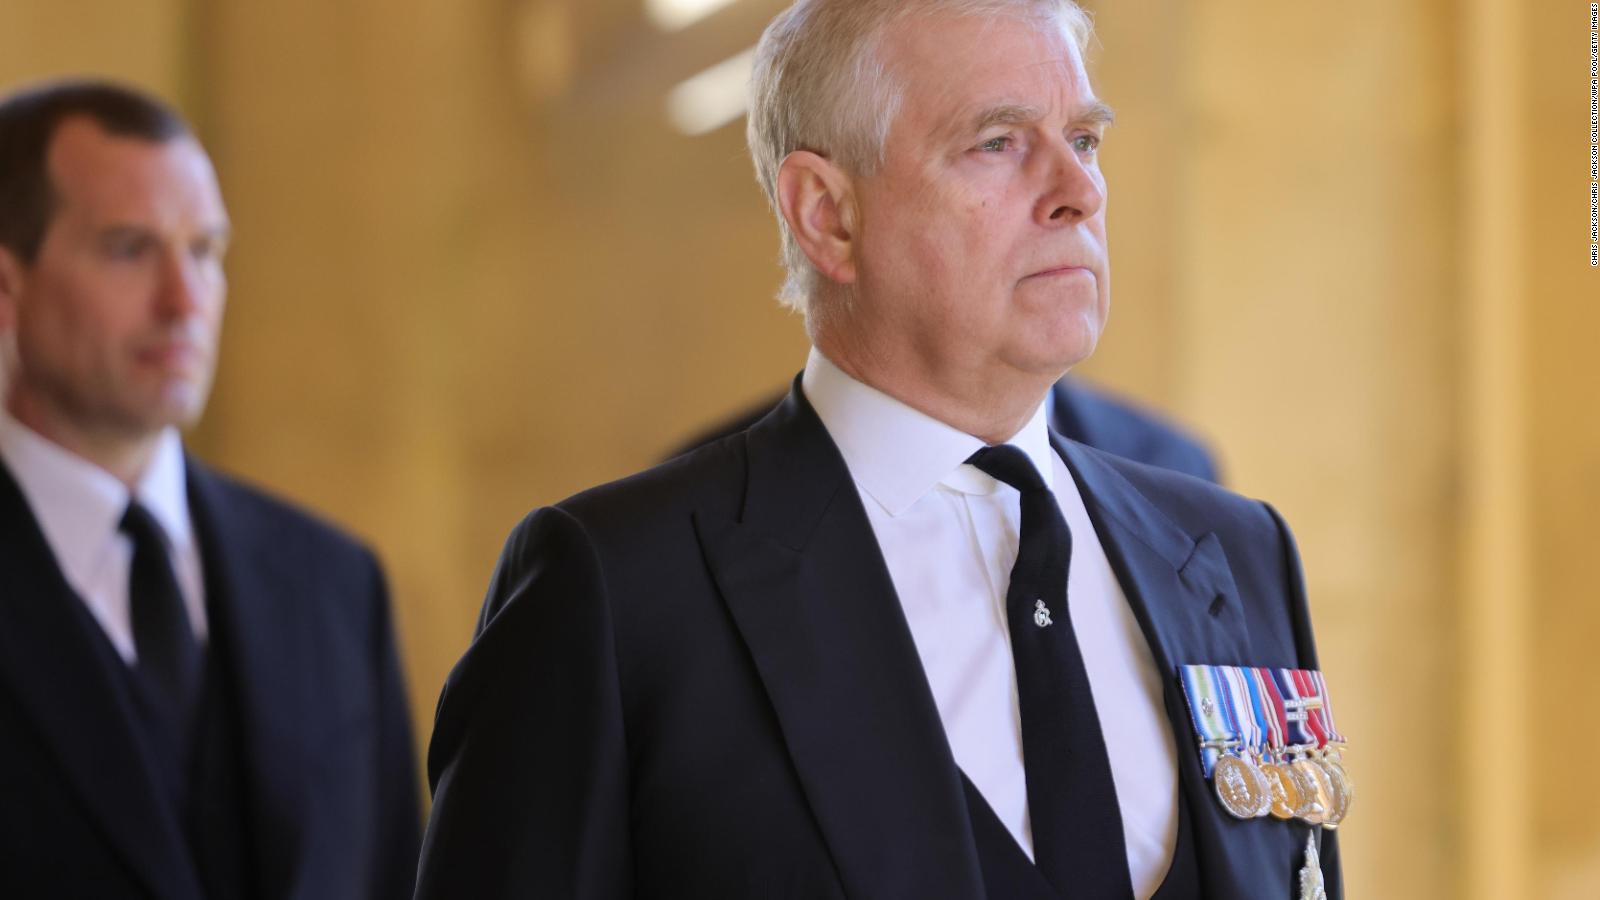 Prince Andrew and Virginia Giuffre reach agreement on abuse case